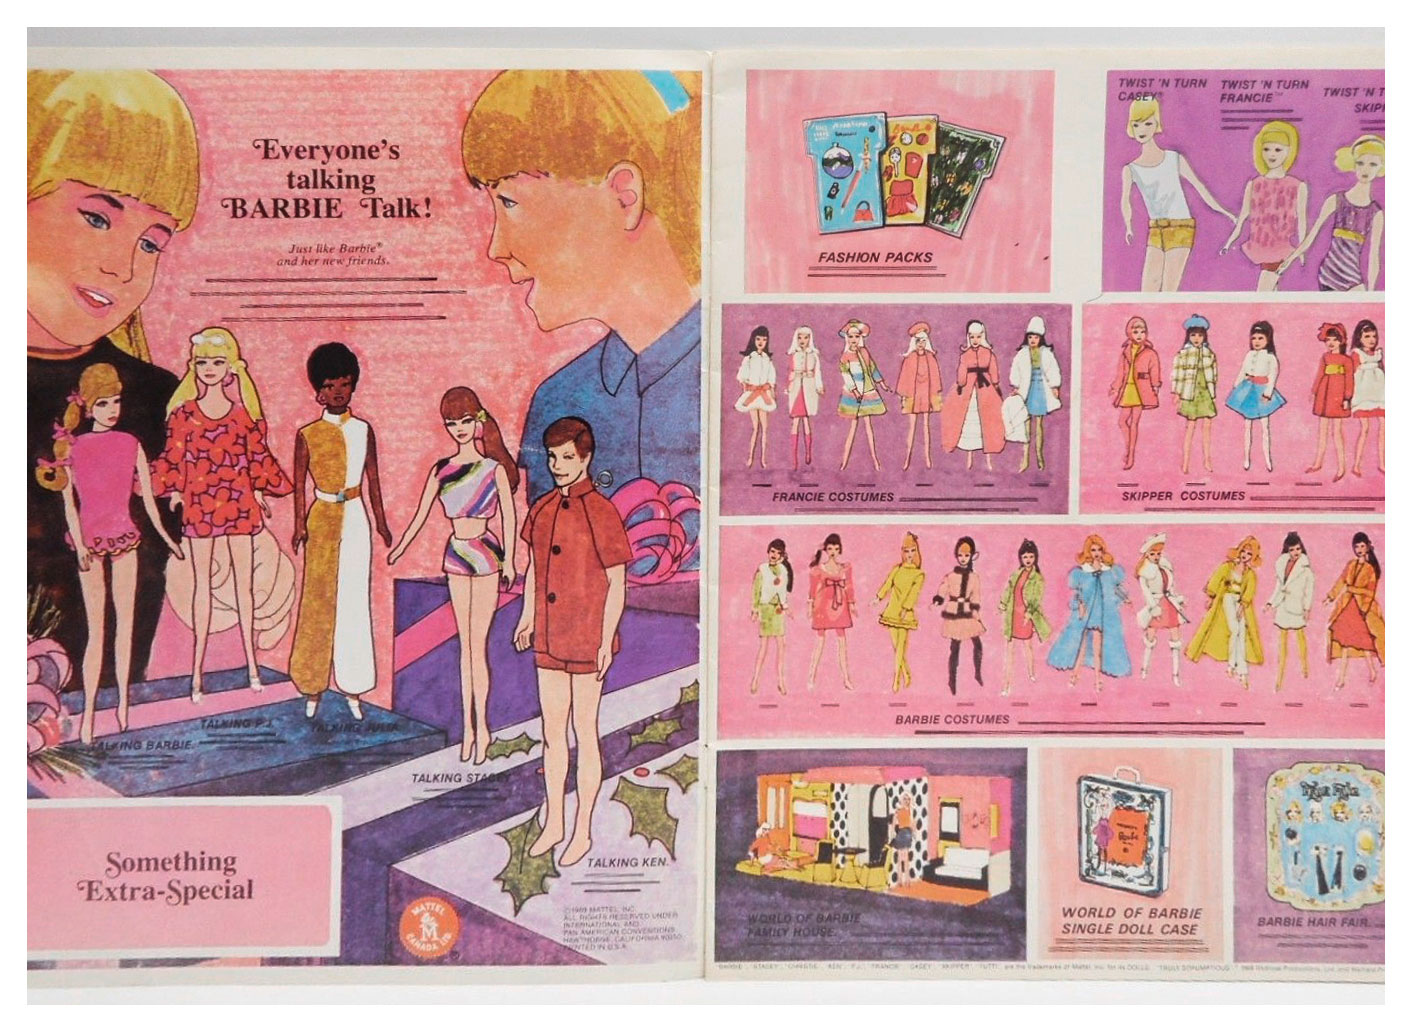 From 1969 Canadian Mattel Toy Book sample book